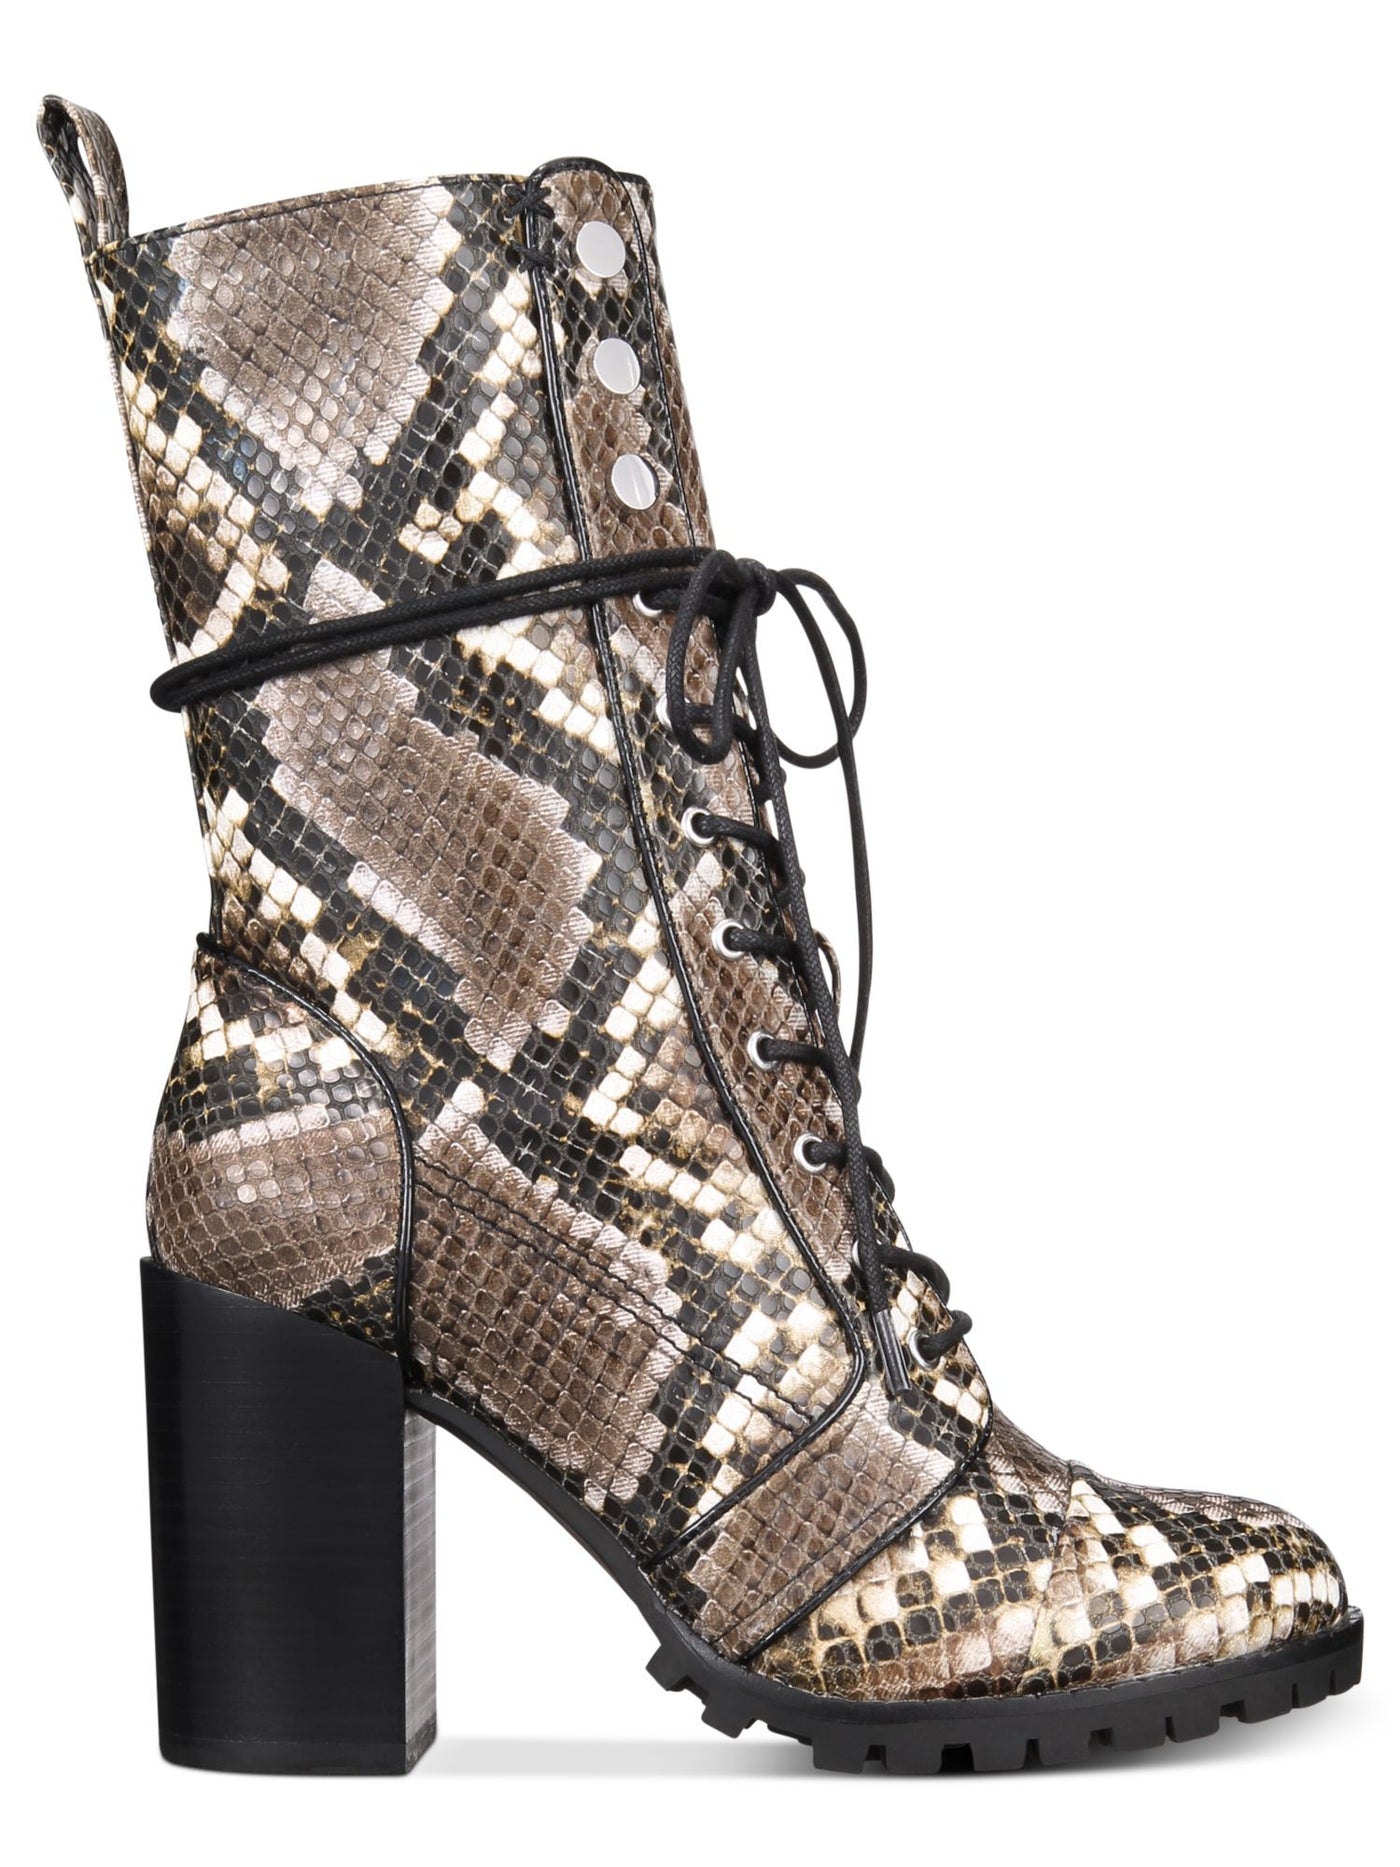 DOLCE VITA Womens Beige Animal Print With Side Zip Round Toe Block Heel Lace-Up Combat Boots 8.5